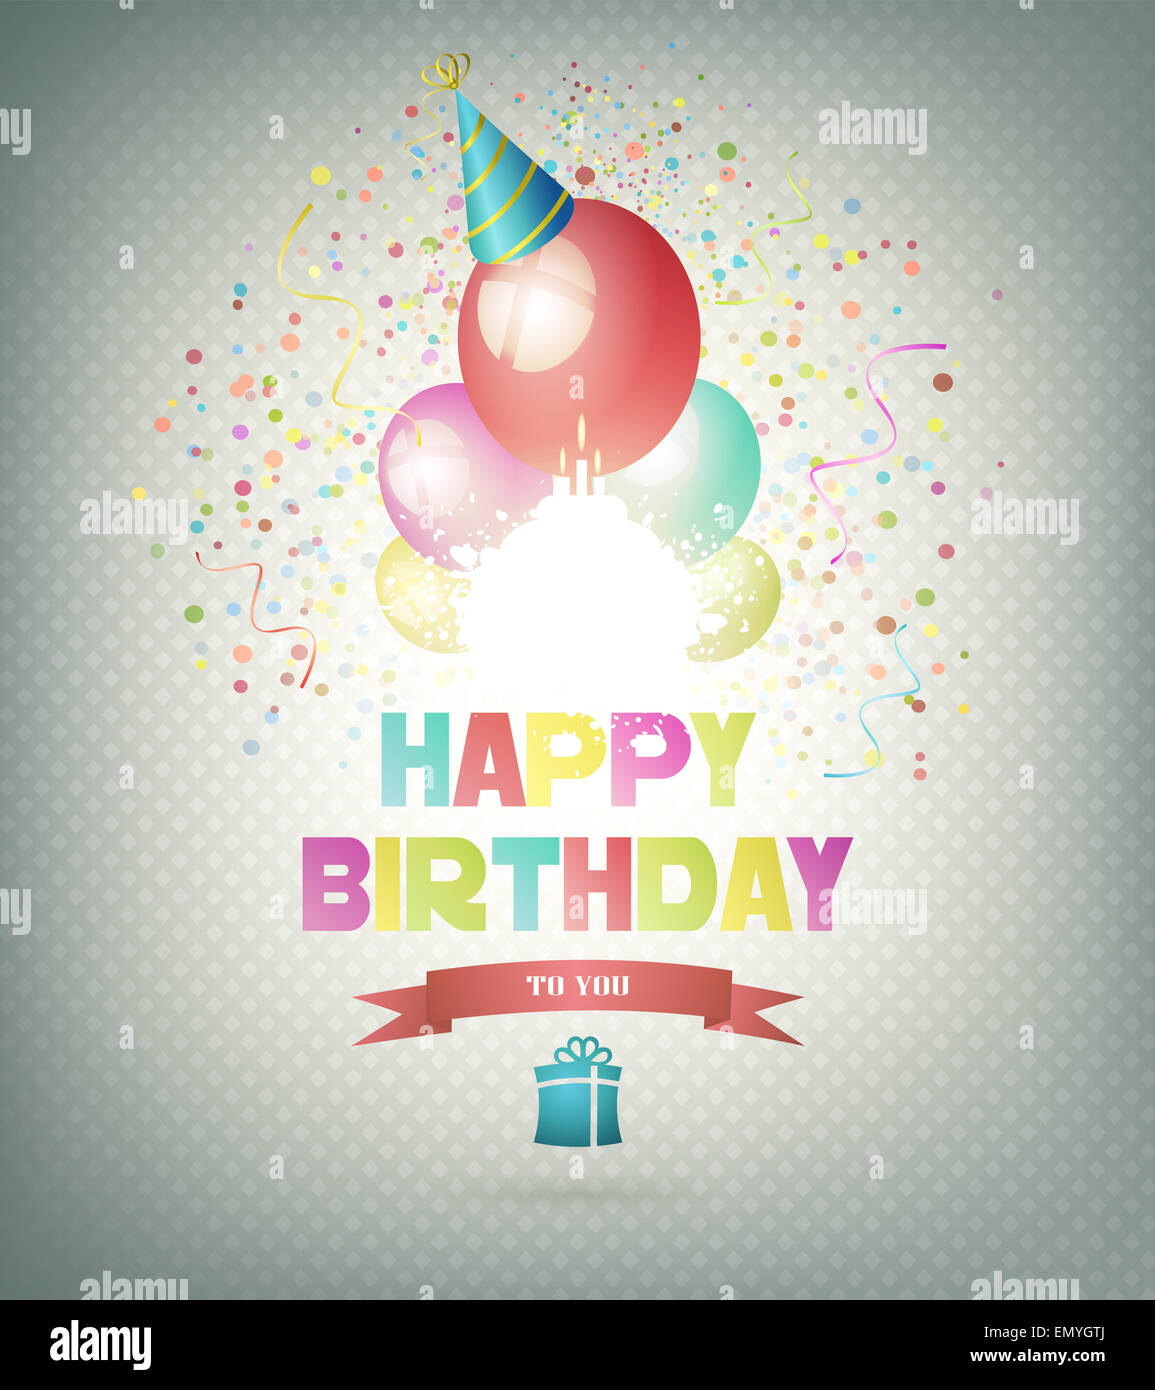 Happy Birthday Background With Balls, Gift And Title Inscription Stock Photo